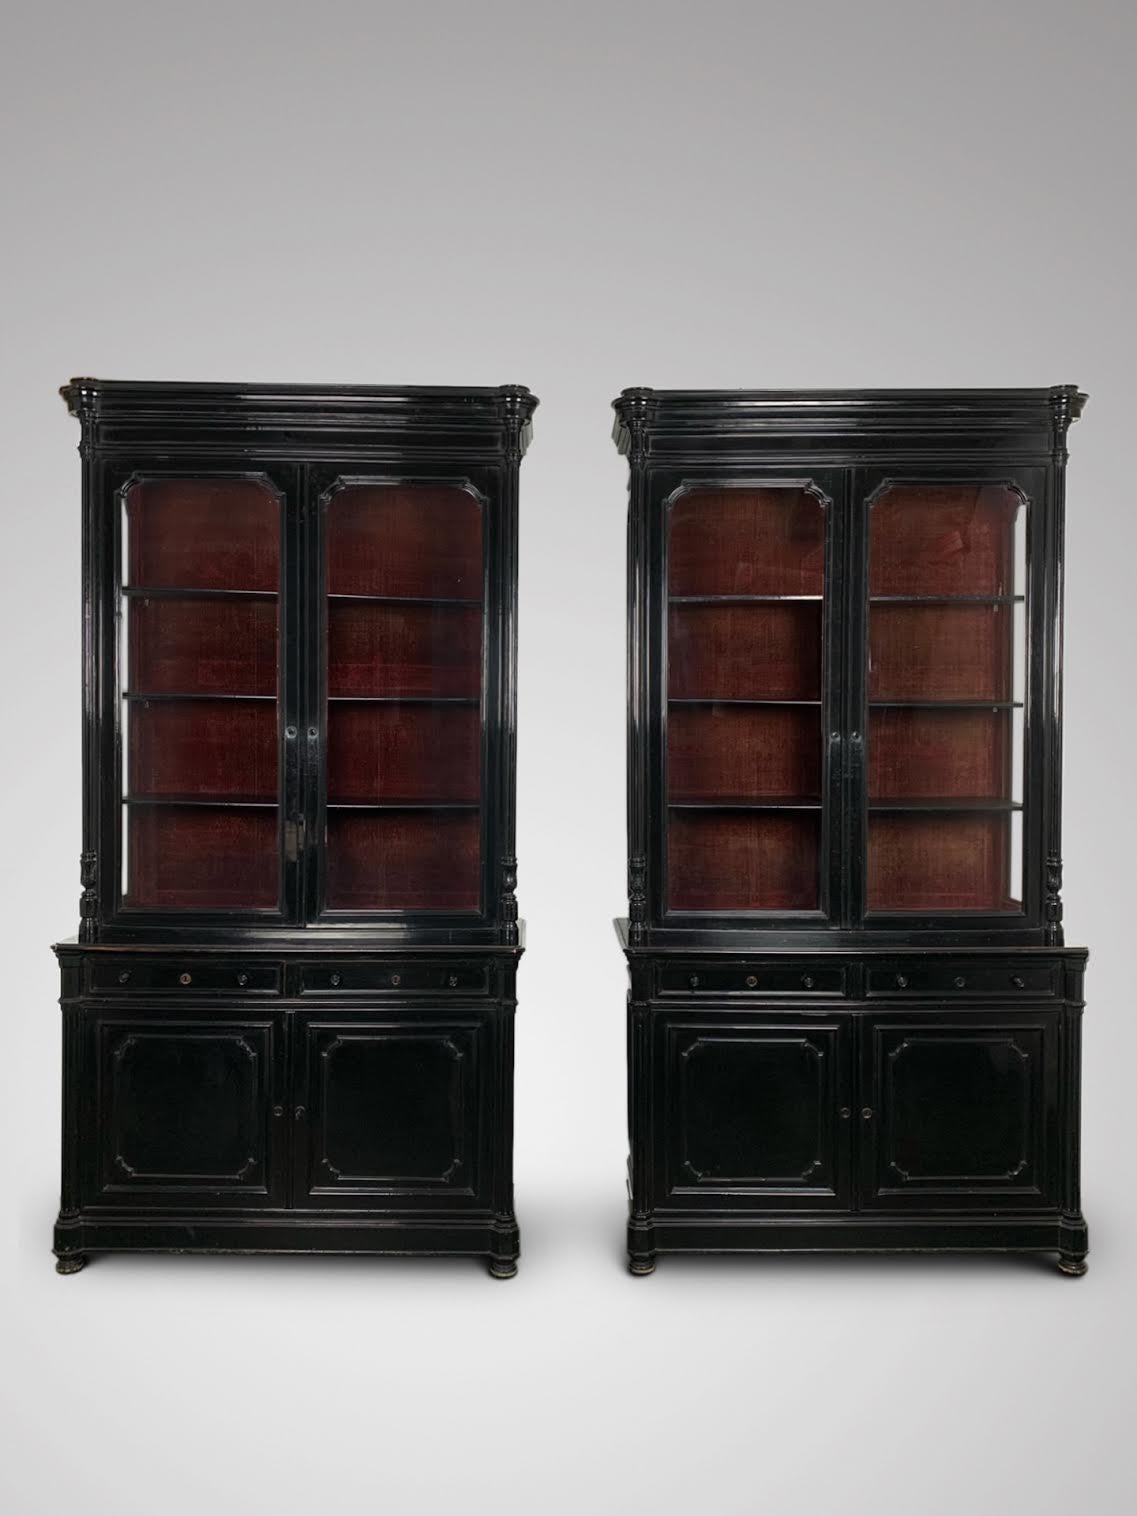 A stunning pair of impressive 19th century French ebonized cabinets or bookcases. Napoleon III Period. It features a rounded moulded cornice above a pair of shaped glazed doors, side panelled glass, flanked by a pair of carved, reeded and turned